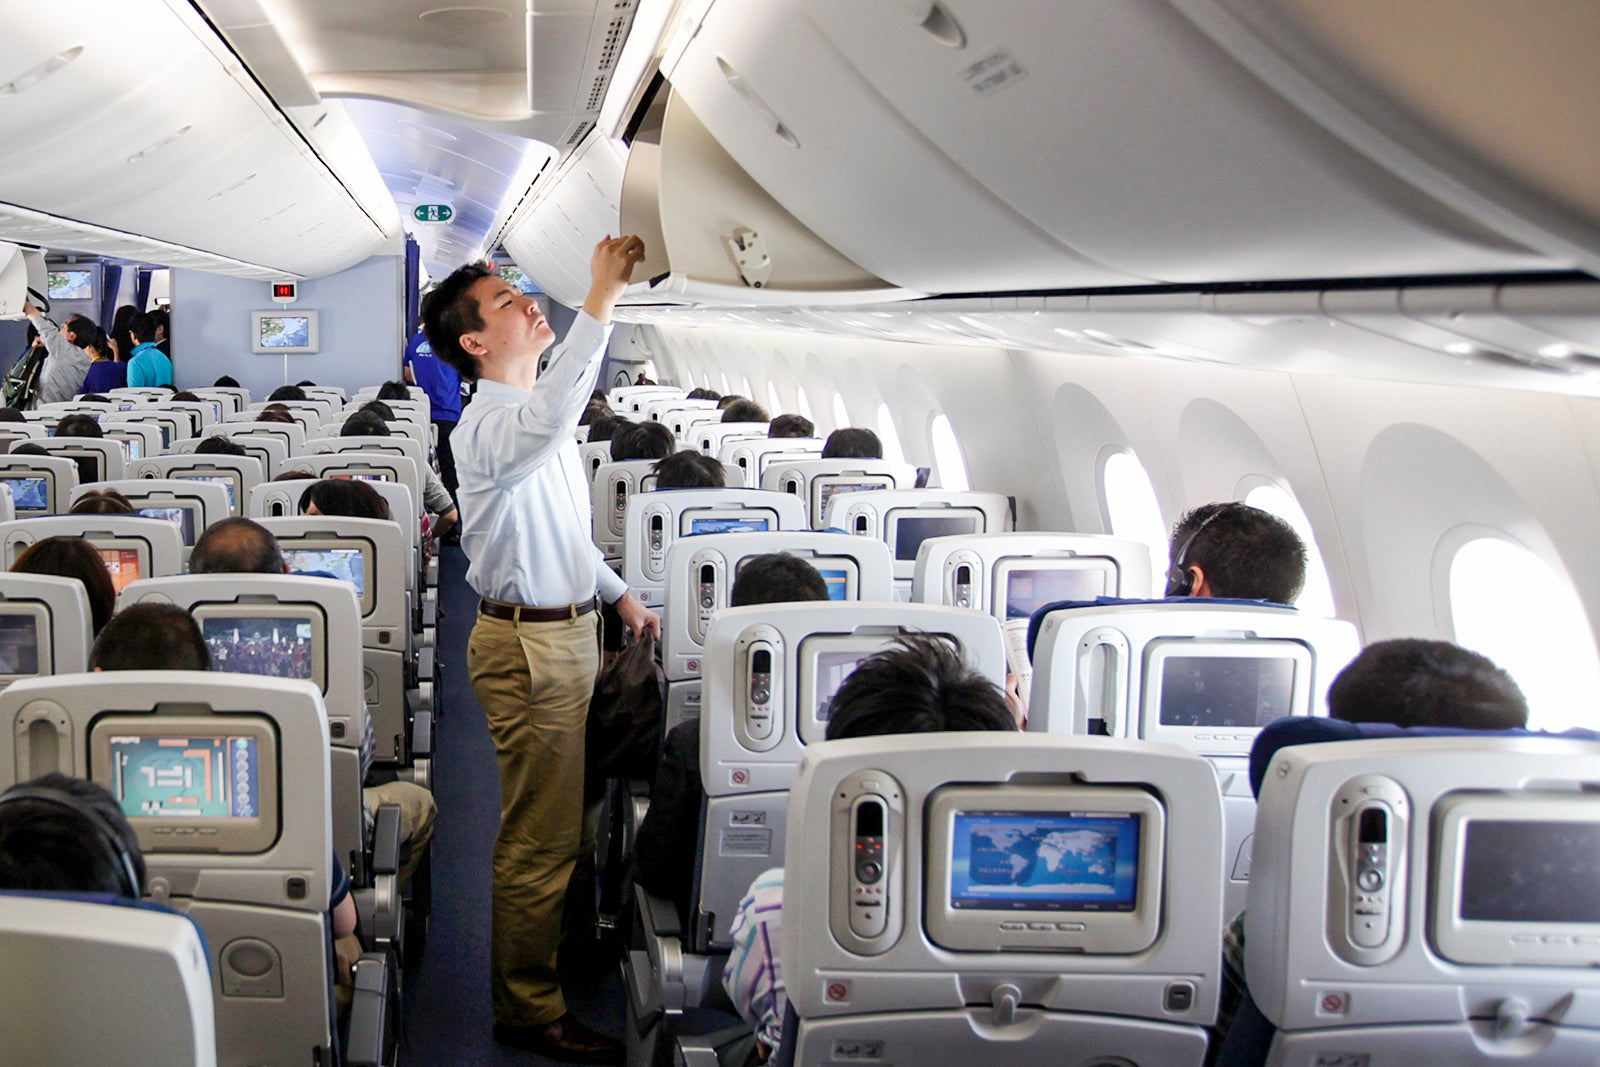 A person standing up in the aisle and looking in the overhead bin 